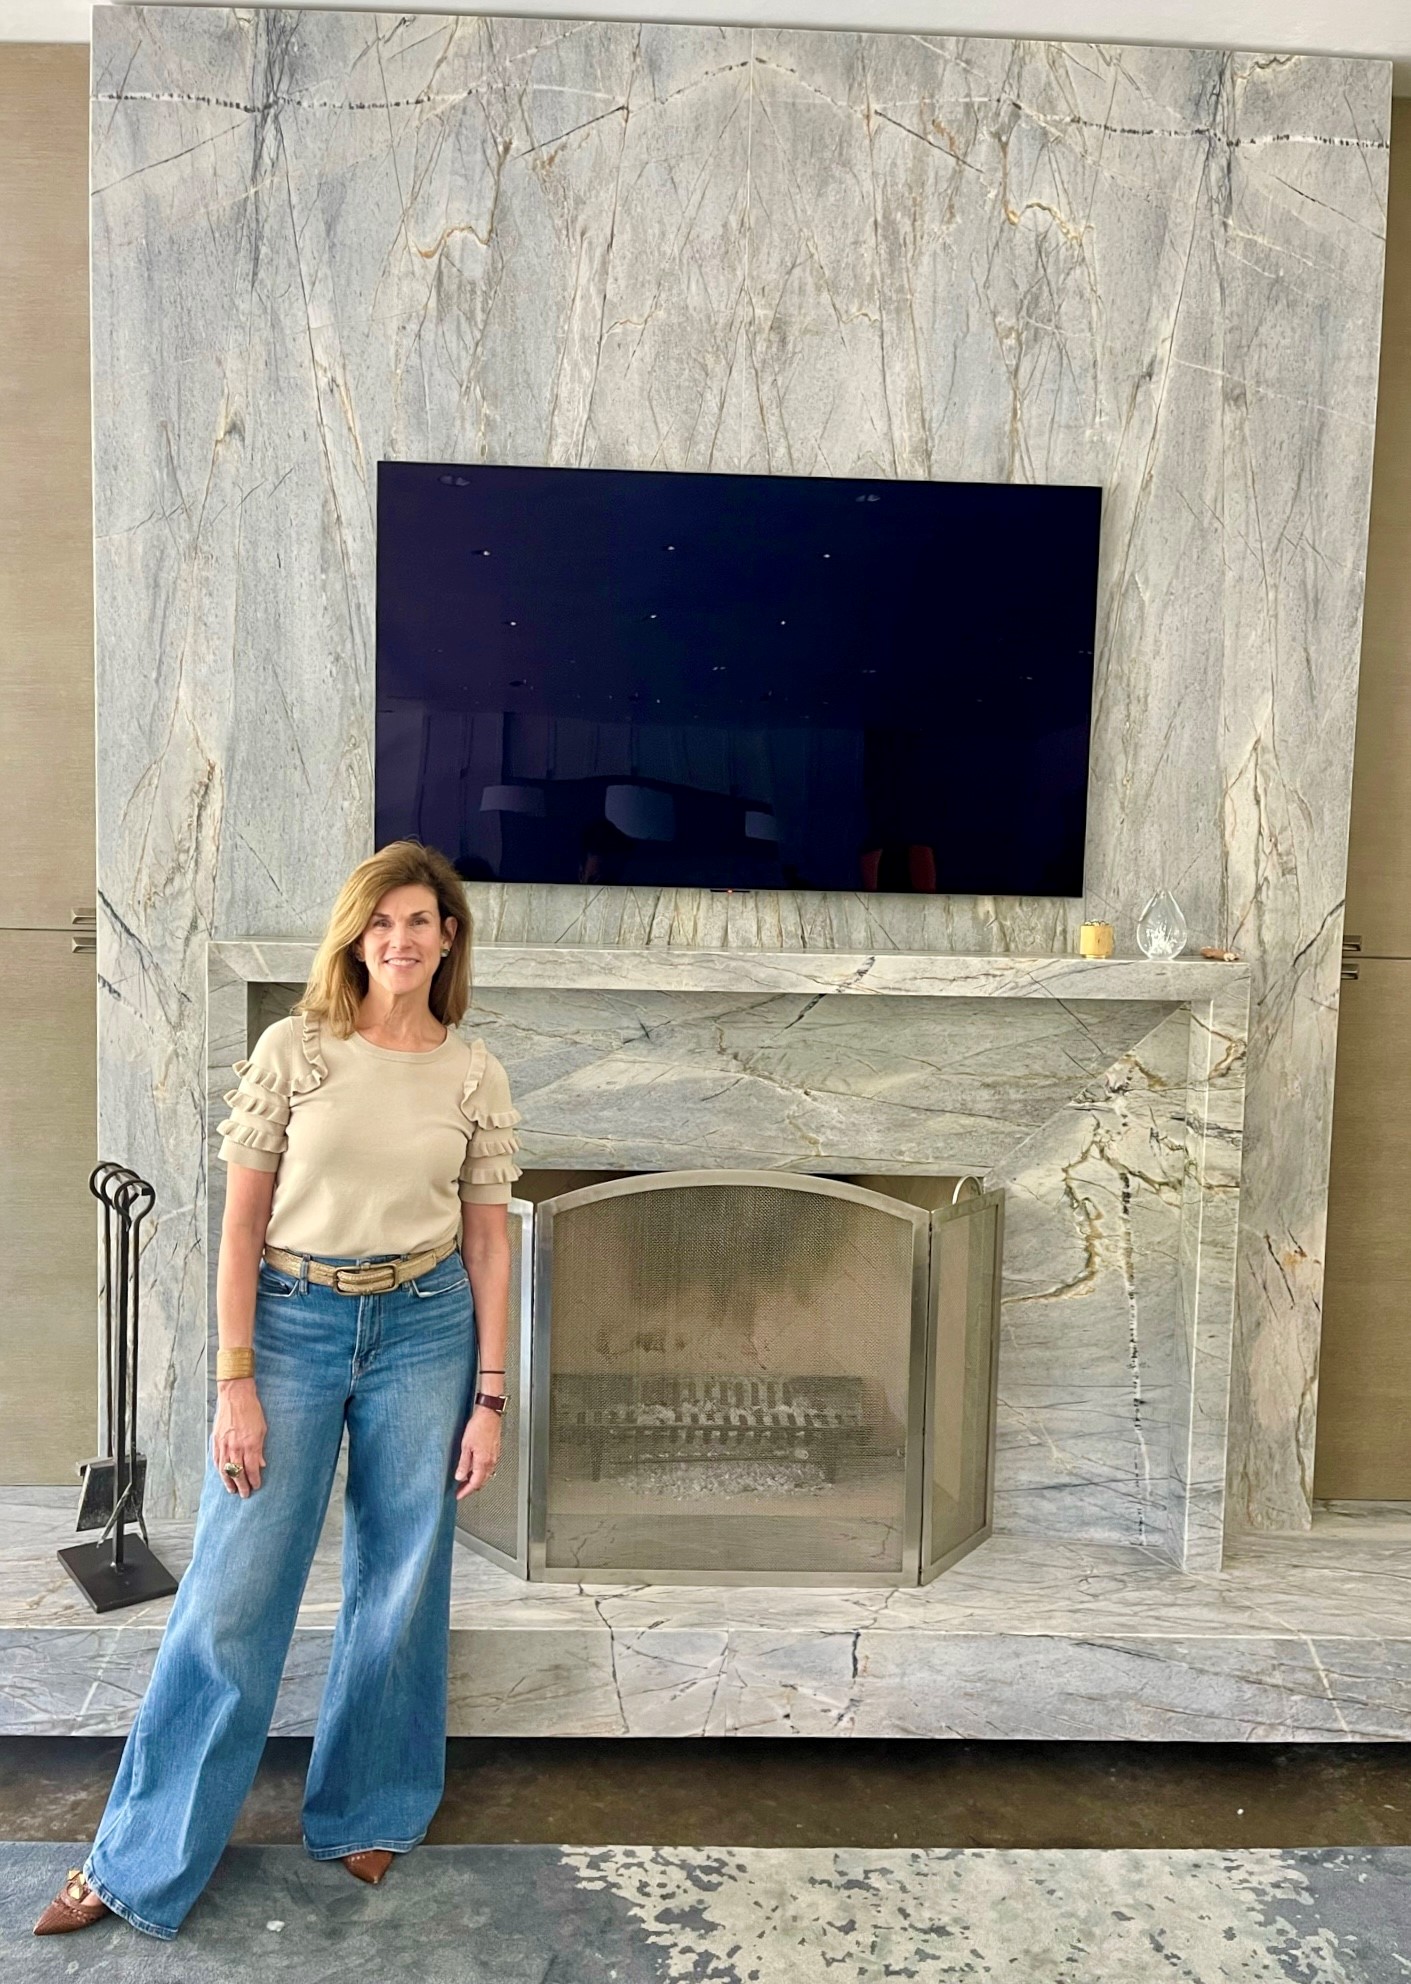 Linda Eyles and Fireplace Mantel with Television